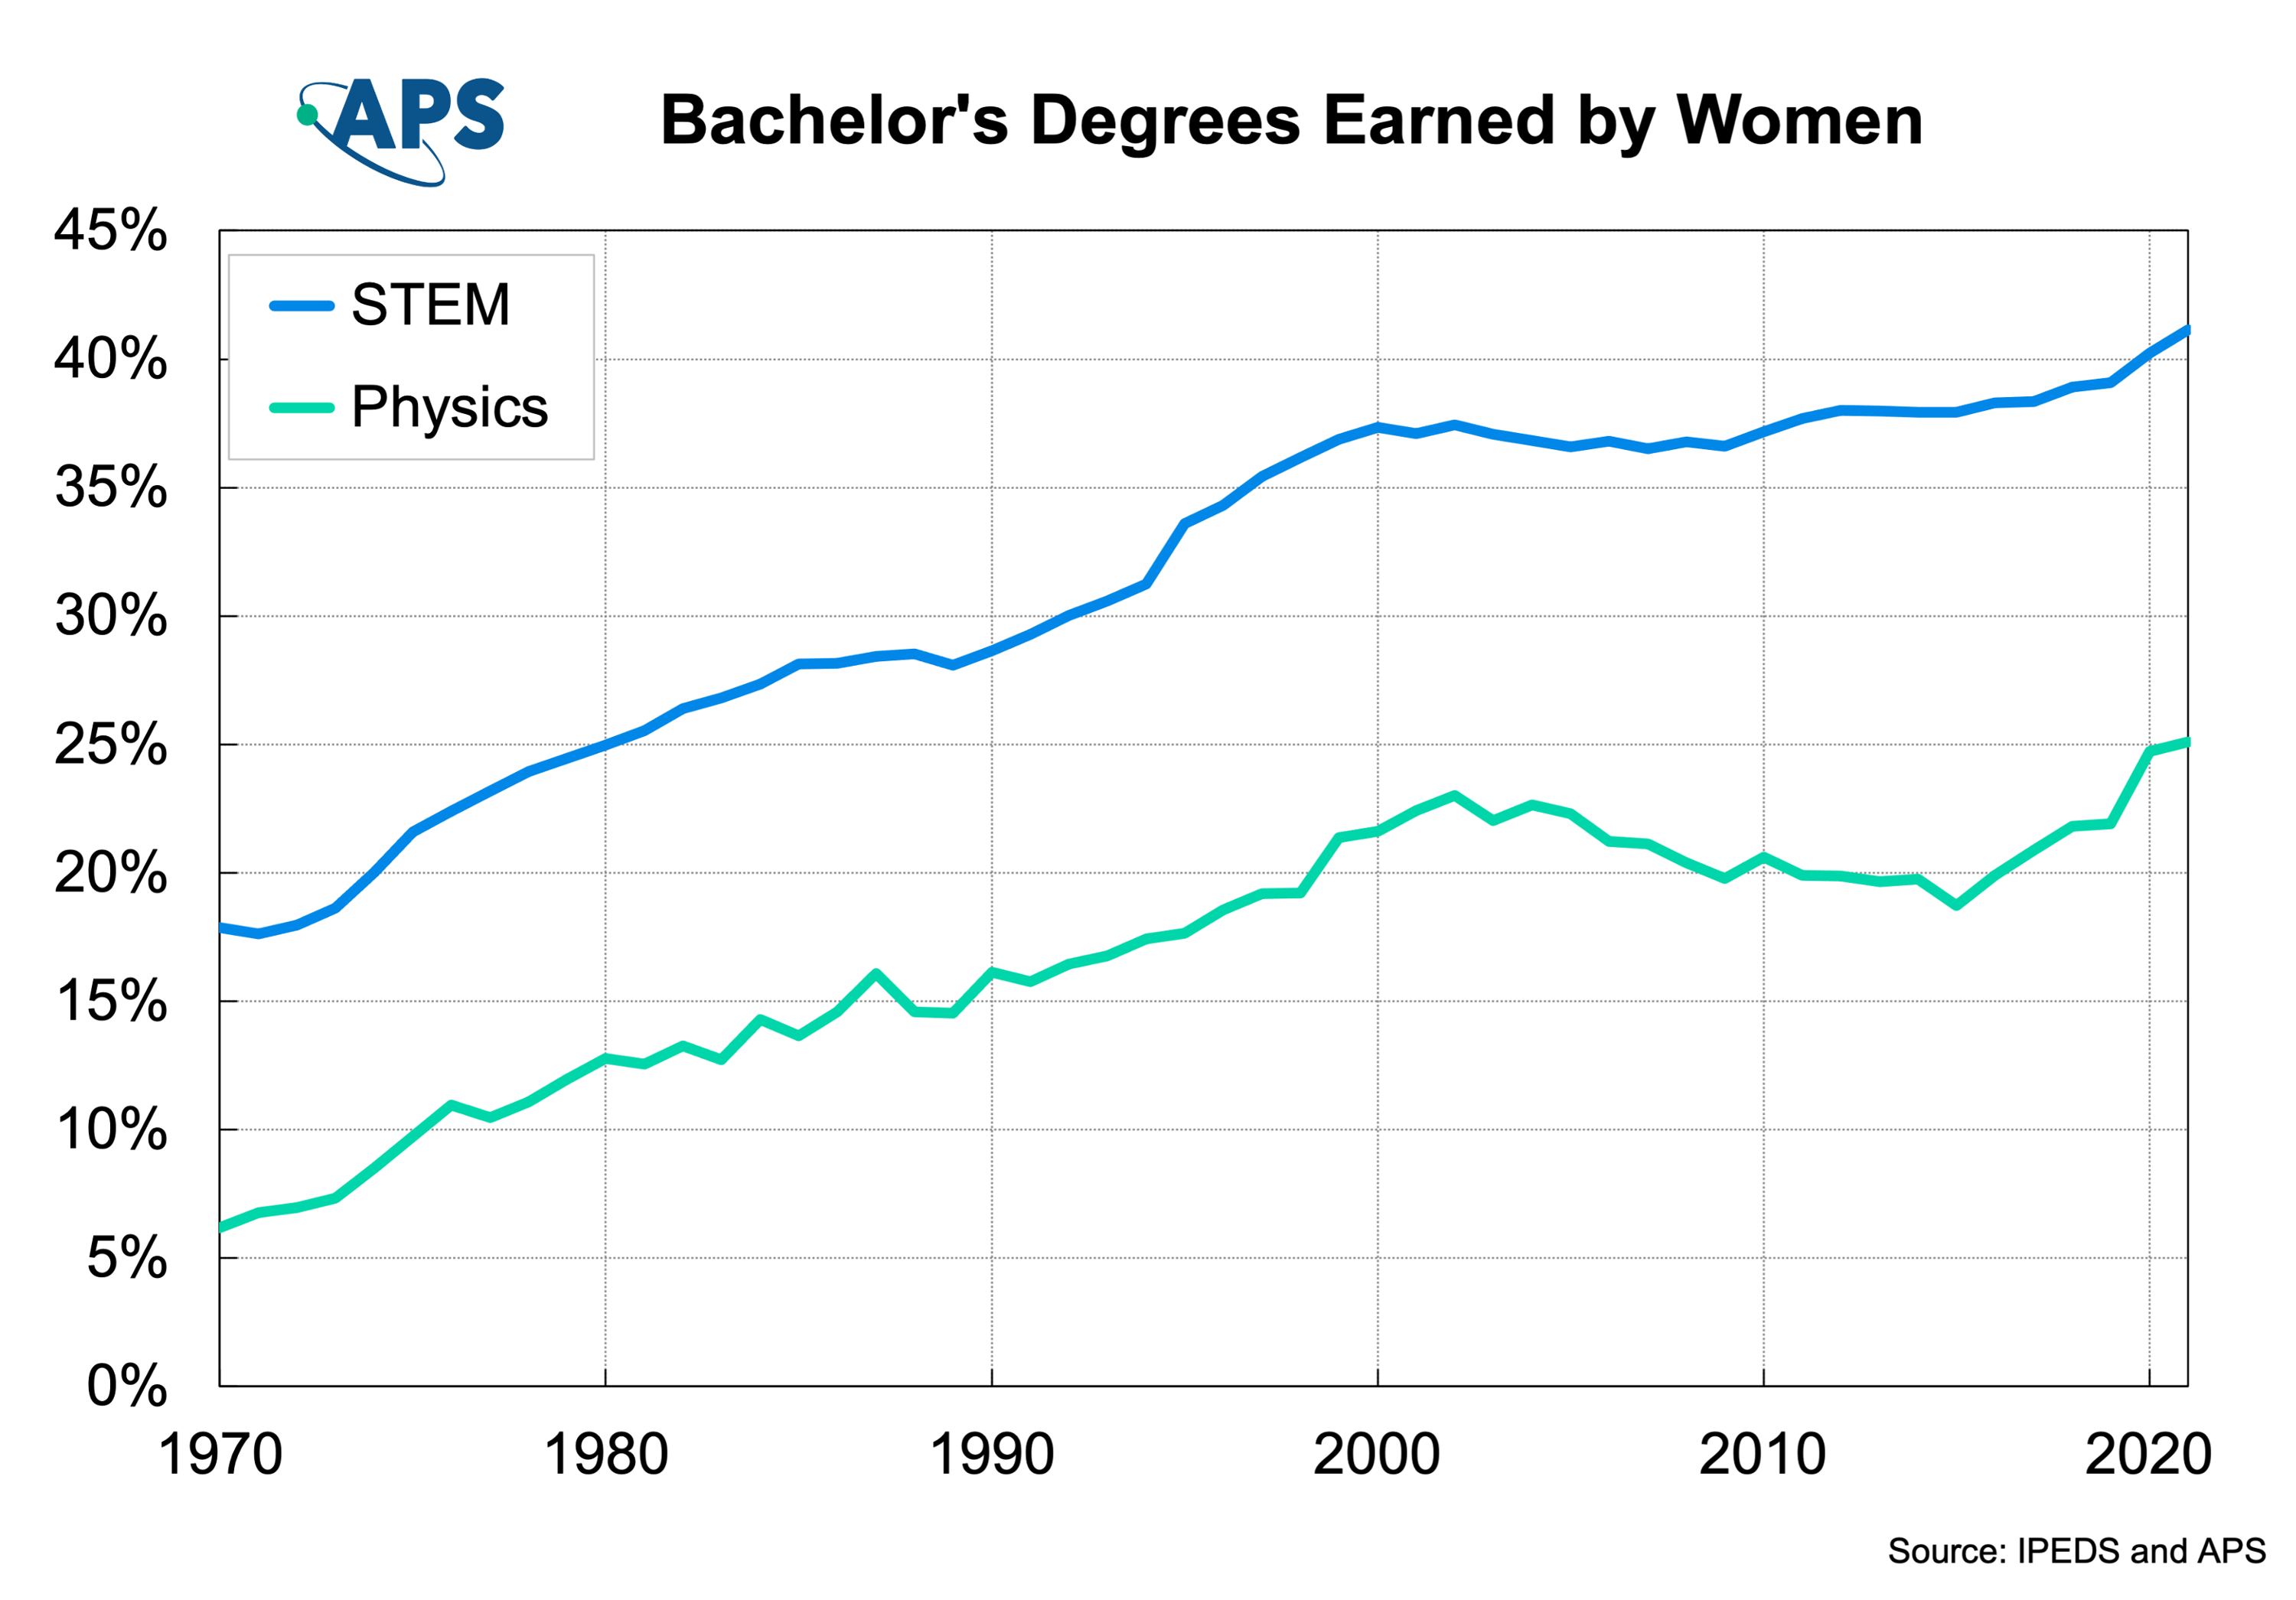 Graph for Bachelor’s Degrees in Physics and STEM Earned by Women